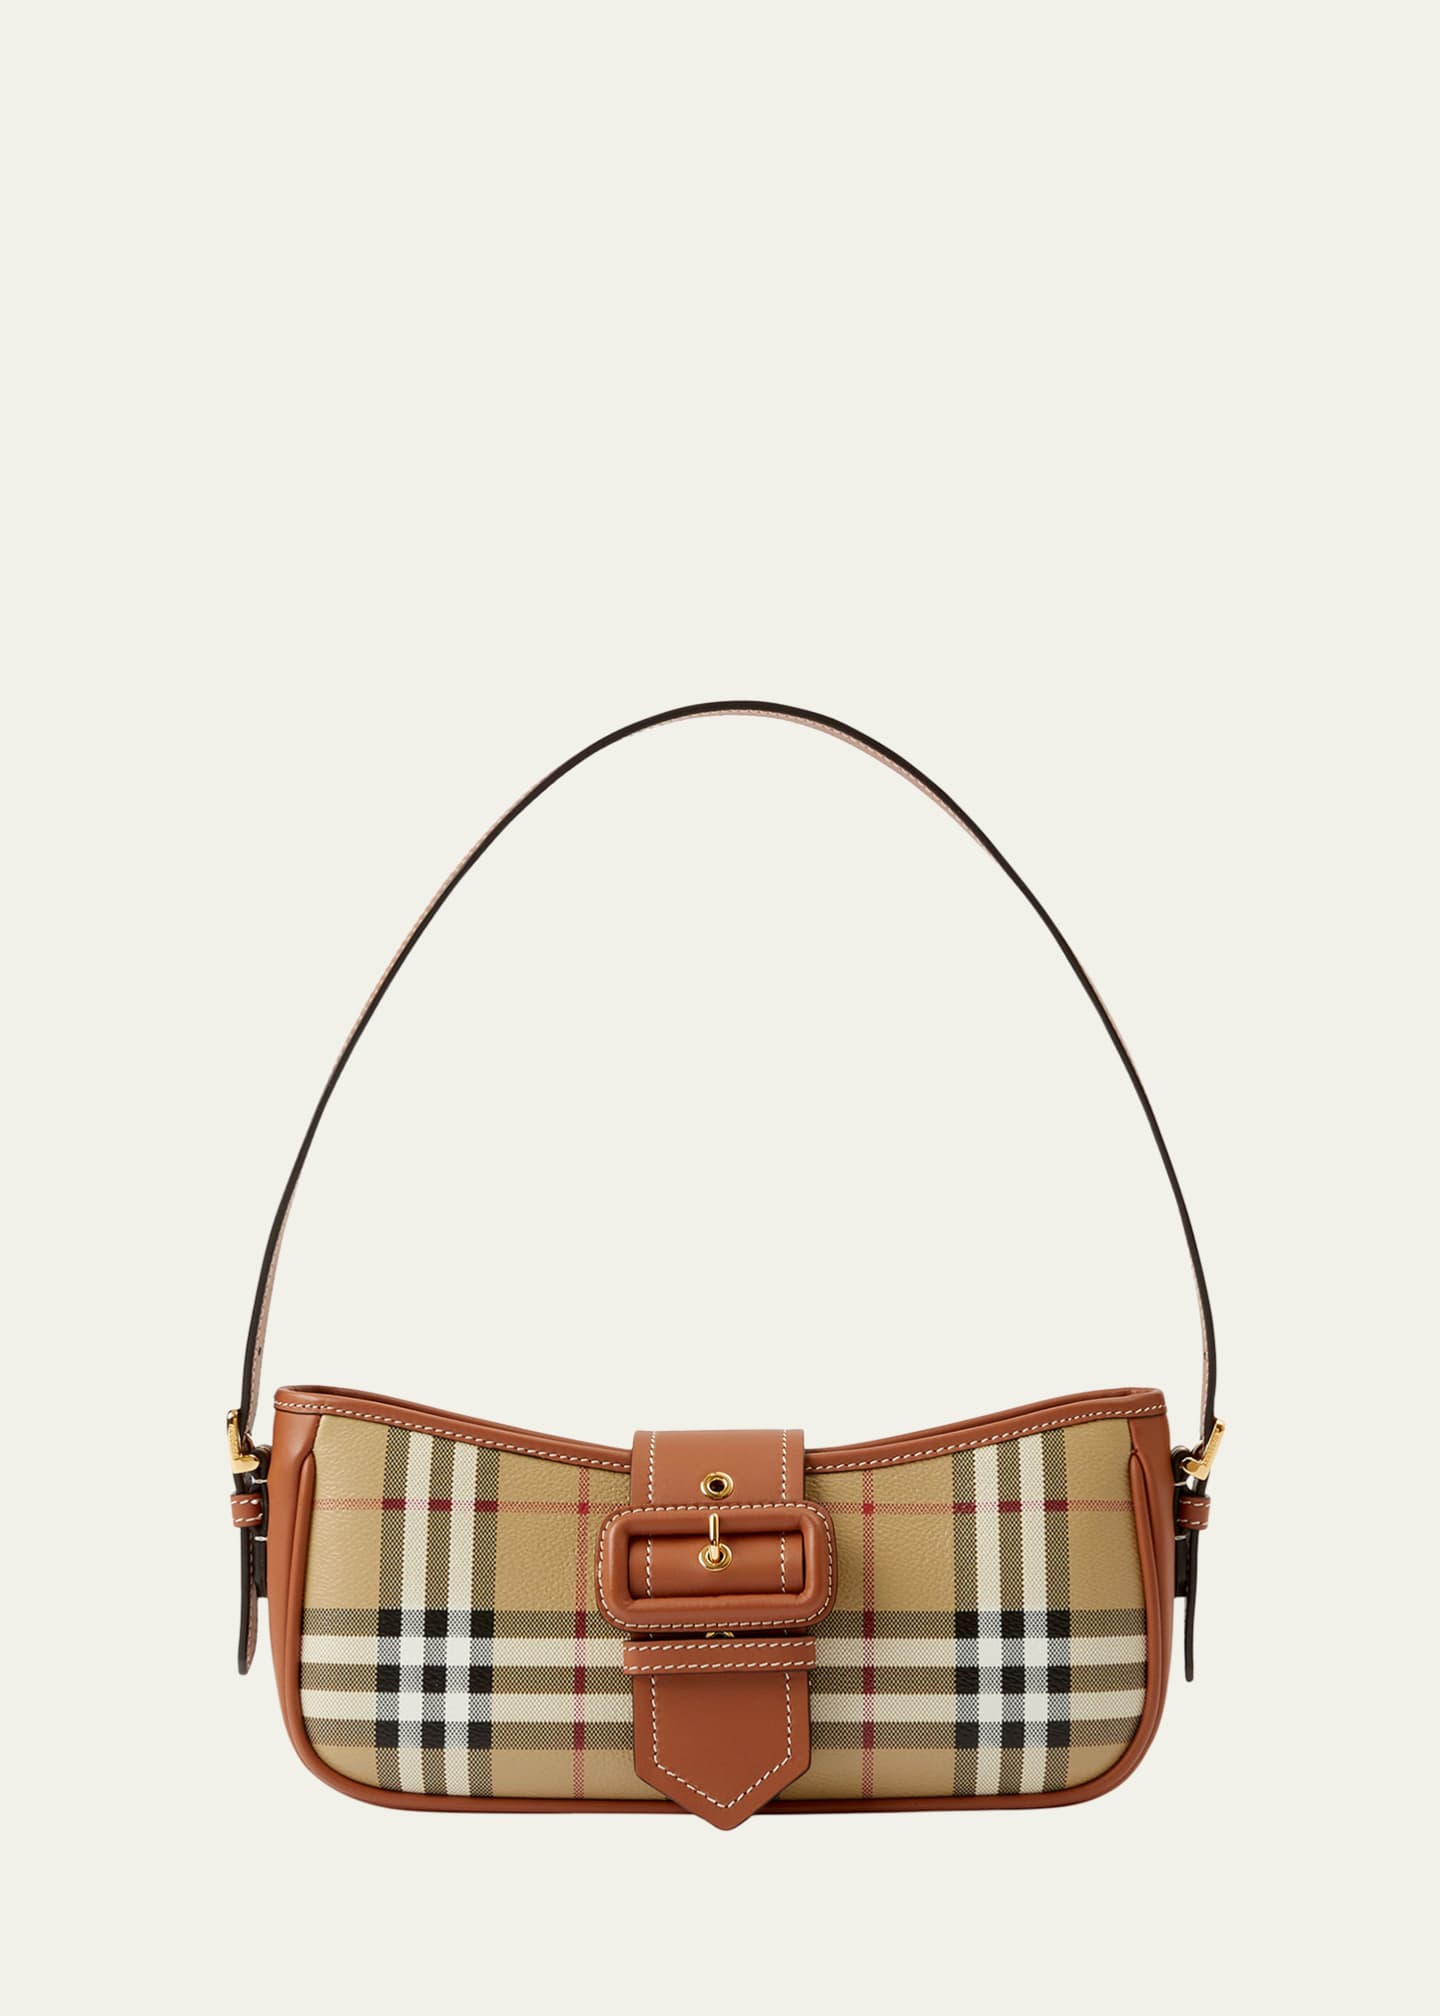 7 Most Popular and Classic Burberry Handbags and Purses